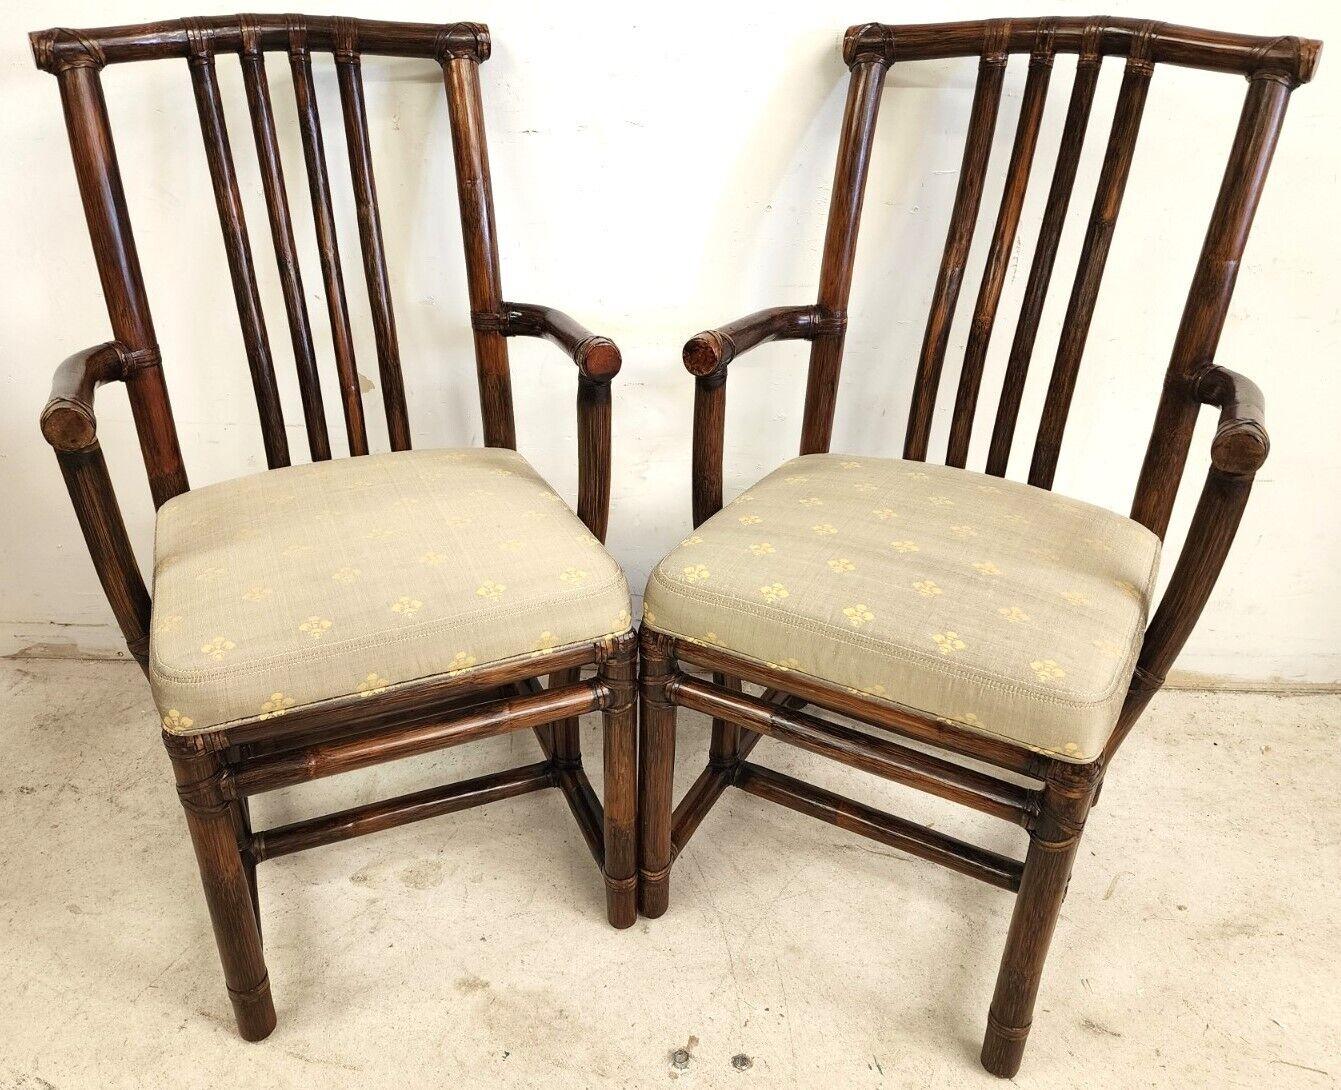 Offering one of our recent Palm Beach Estate fine furniture acquisitions of A. 
Set of 2 Vintage Asian Pogoda Style bamboo rattan dining chairs with silk seats by McGuire.

Crafted out of a sturdy bamboo secured with leather strapping. Each